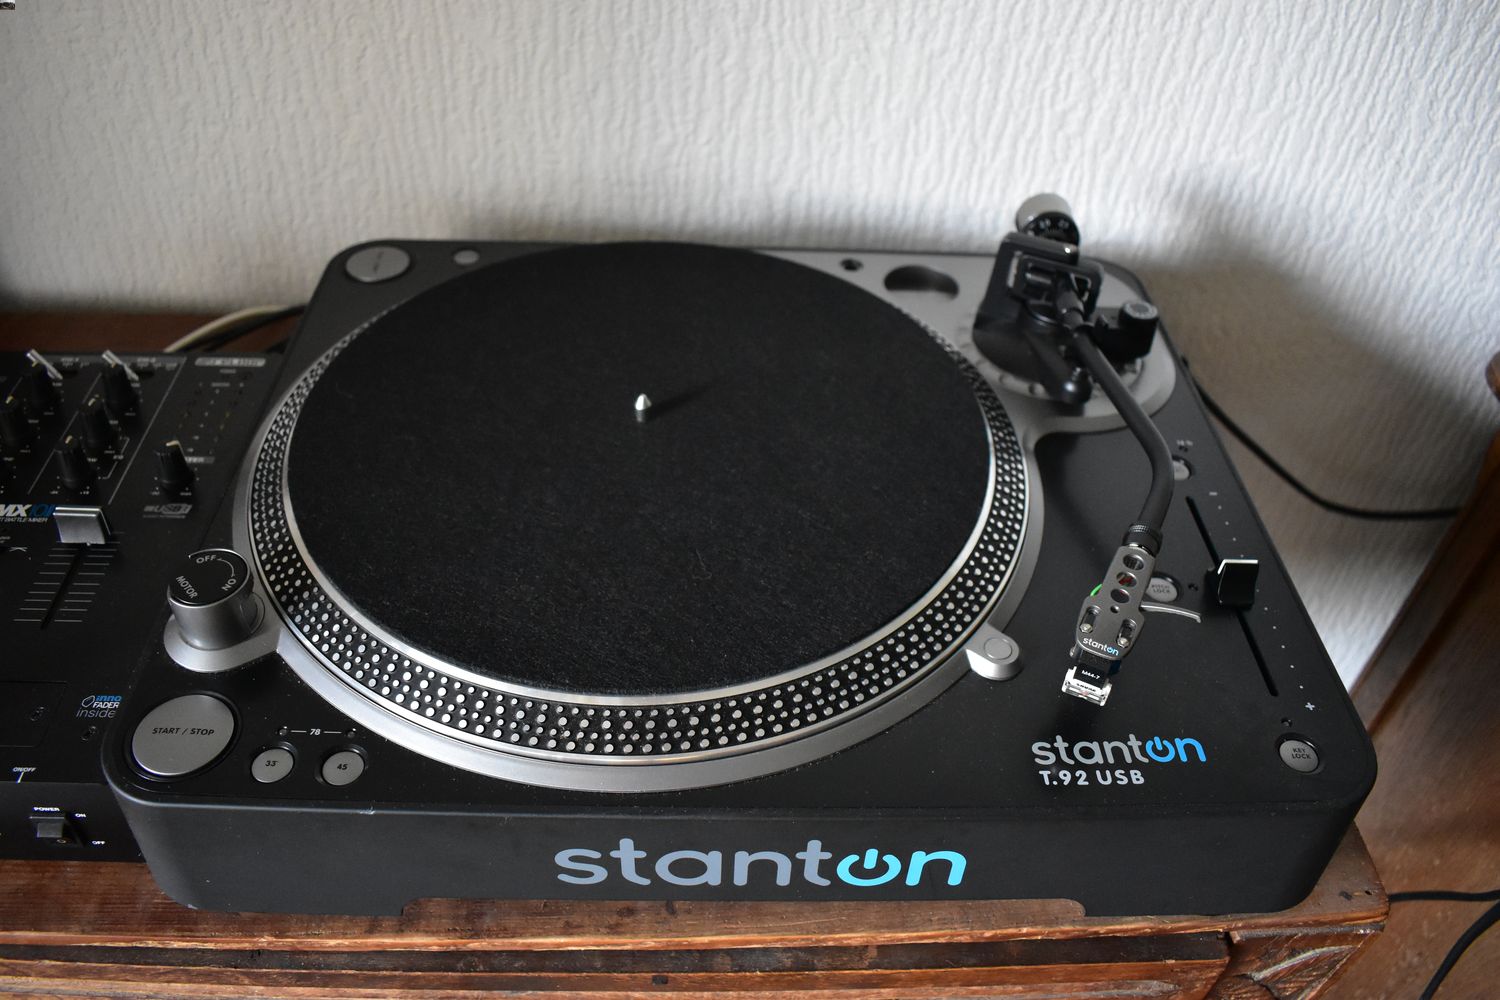 How To Mod Stanton T92 Tonearm With A Different One For Audiophile Playback